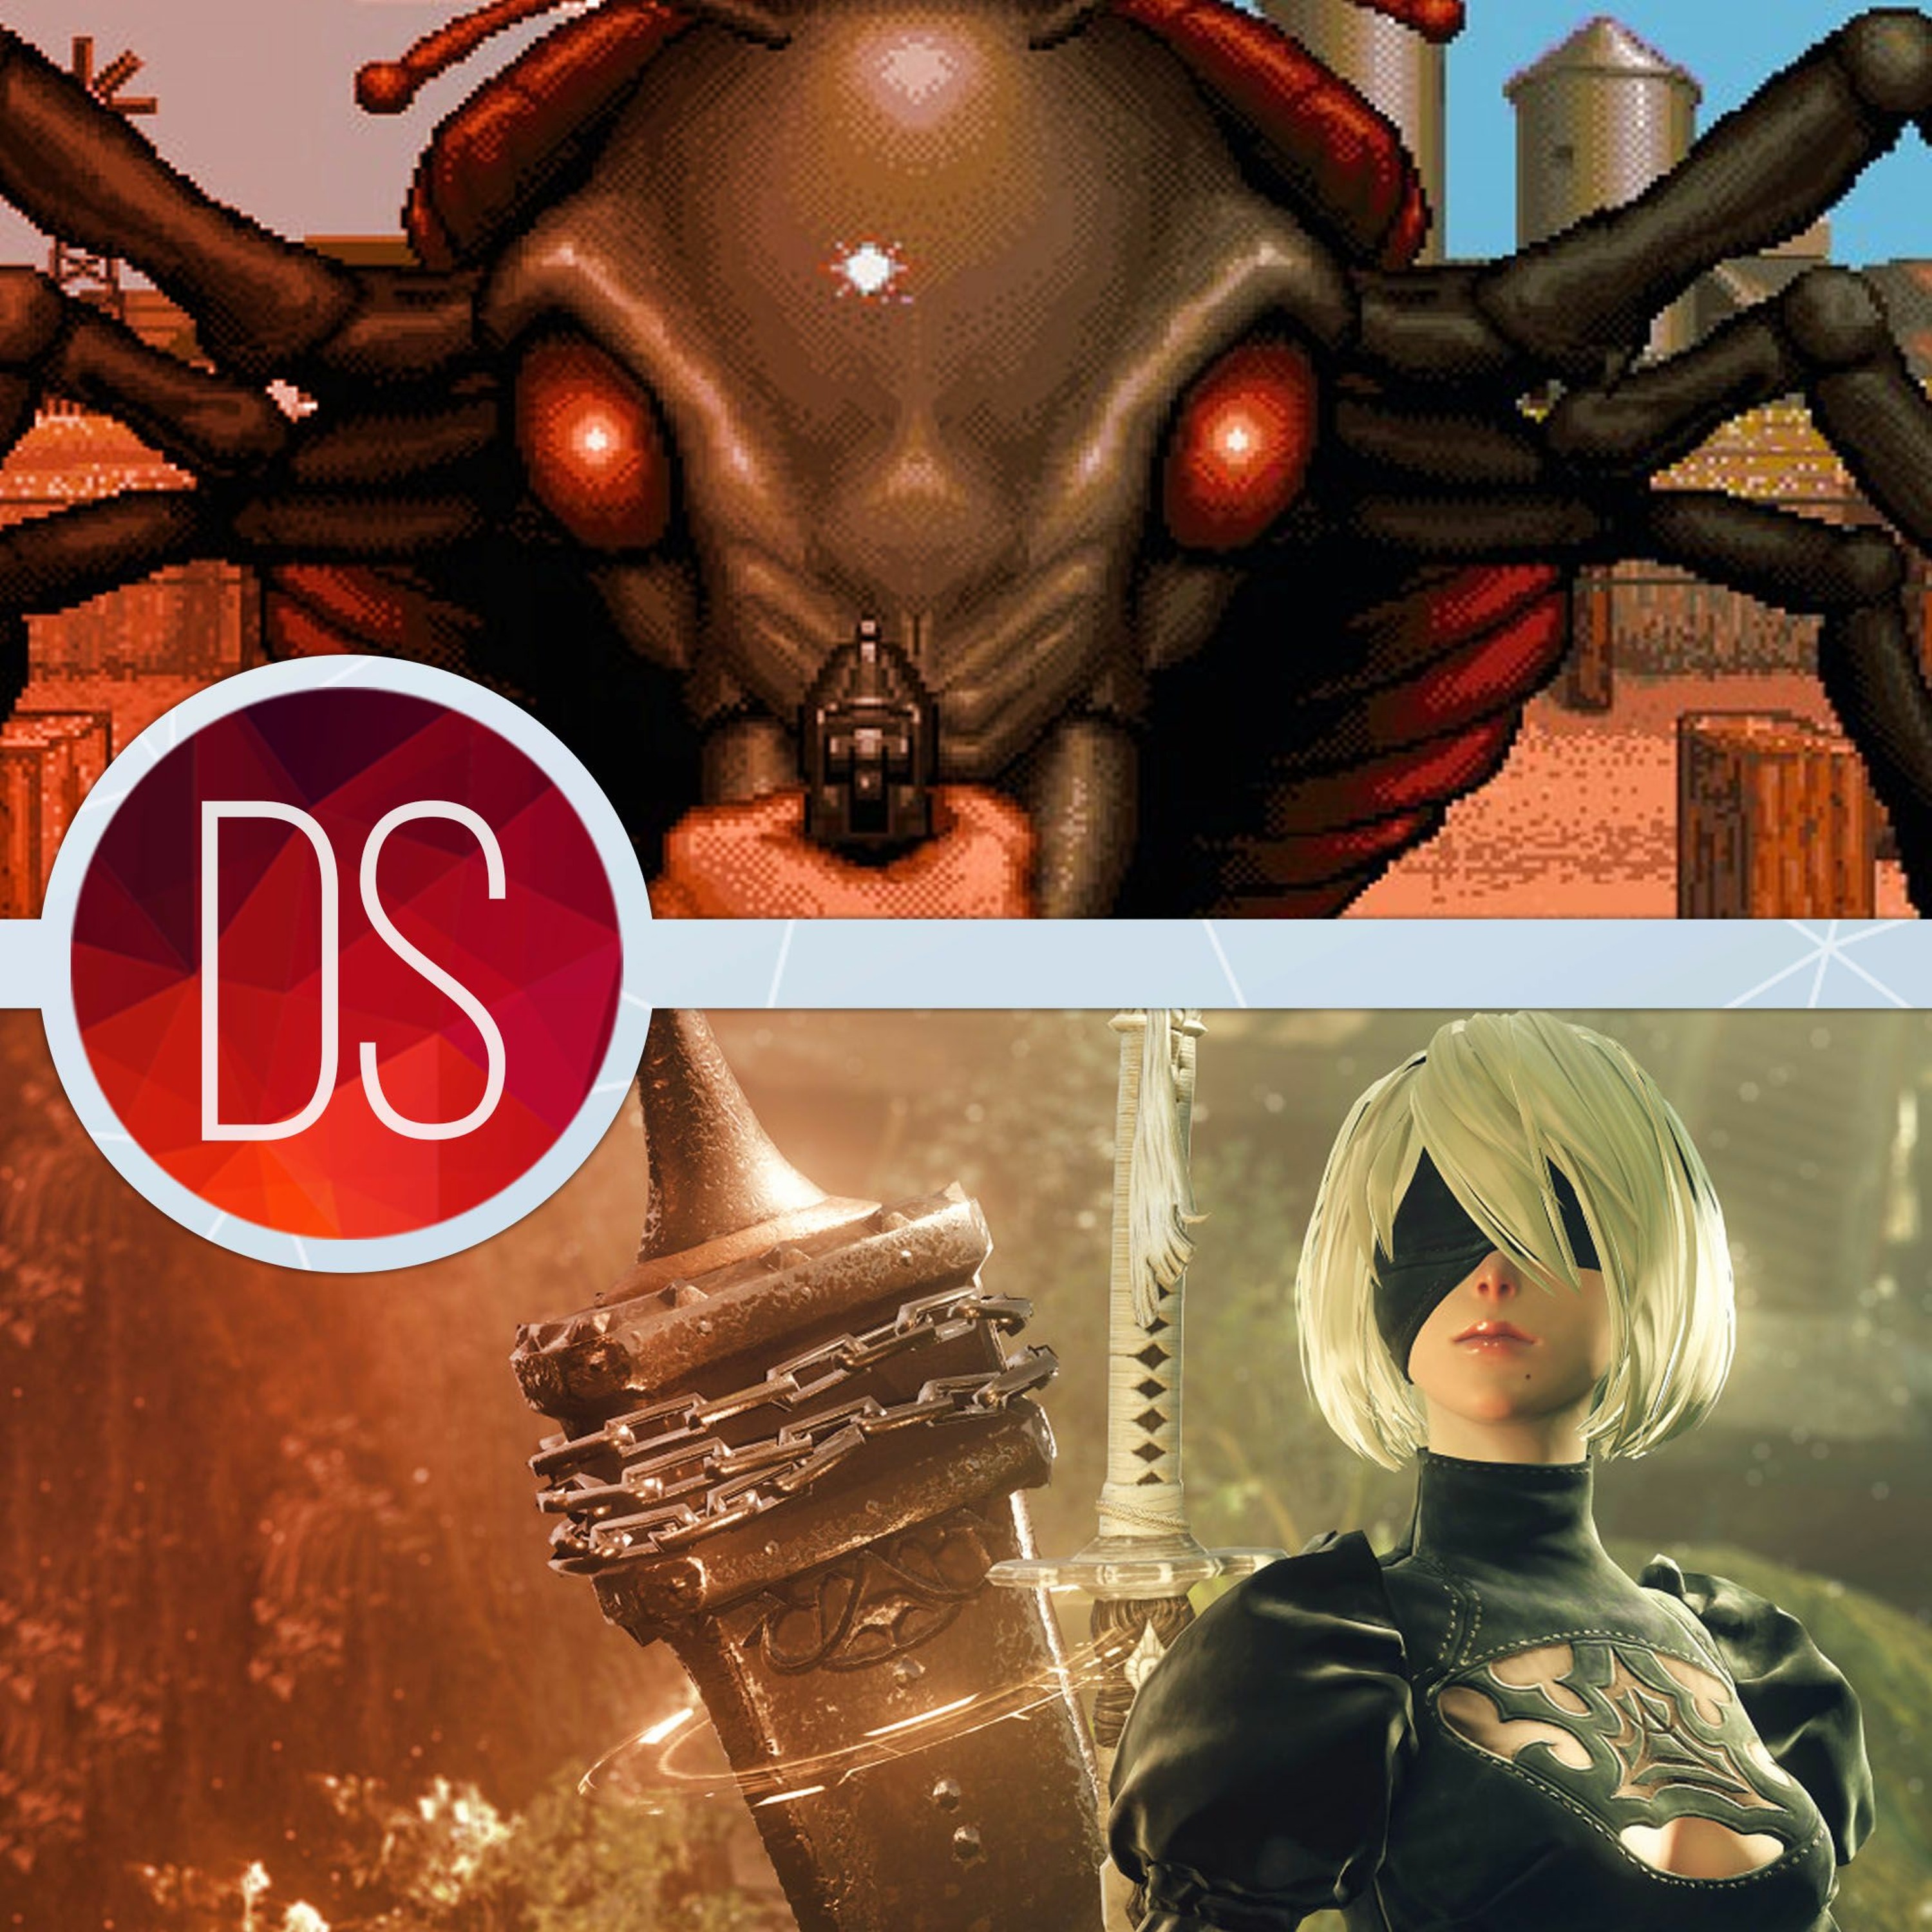 91: Nier Automata, It Came From The Desert